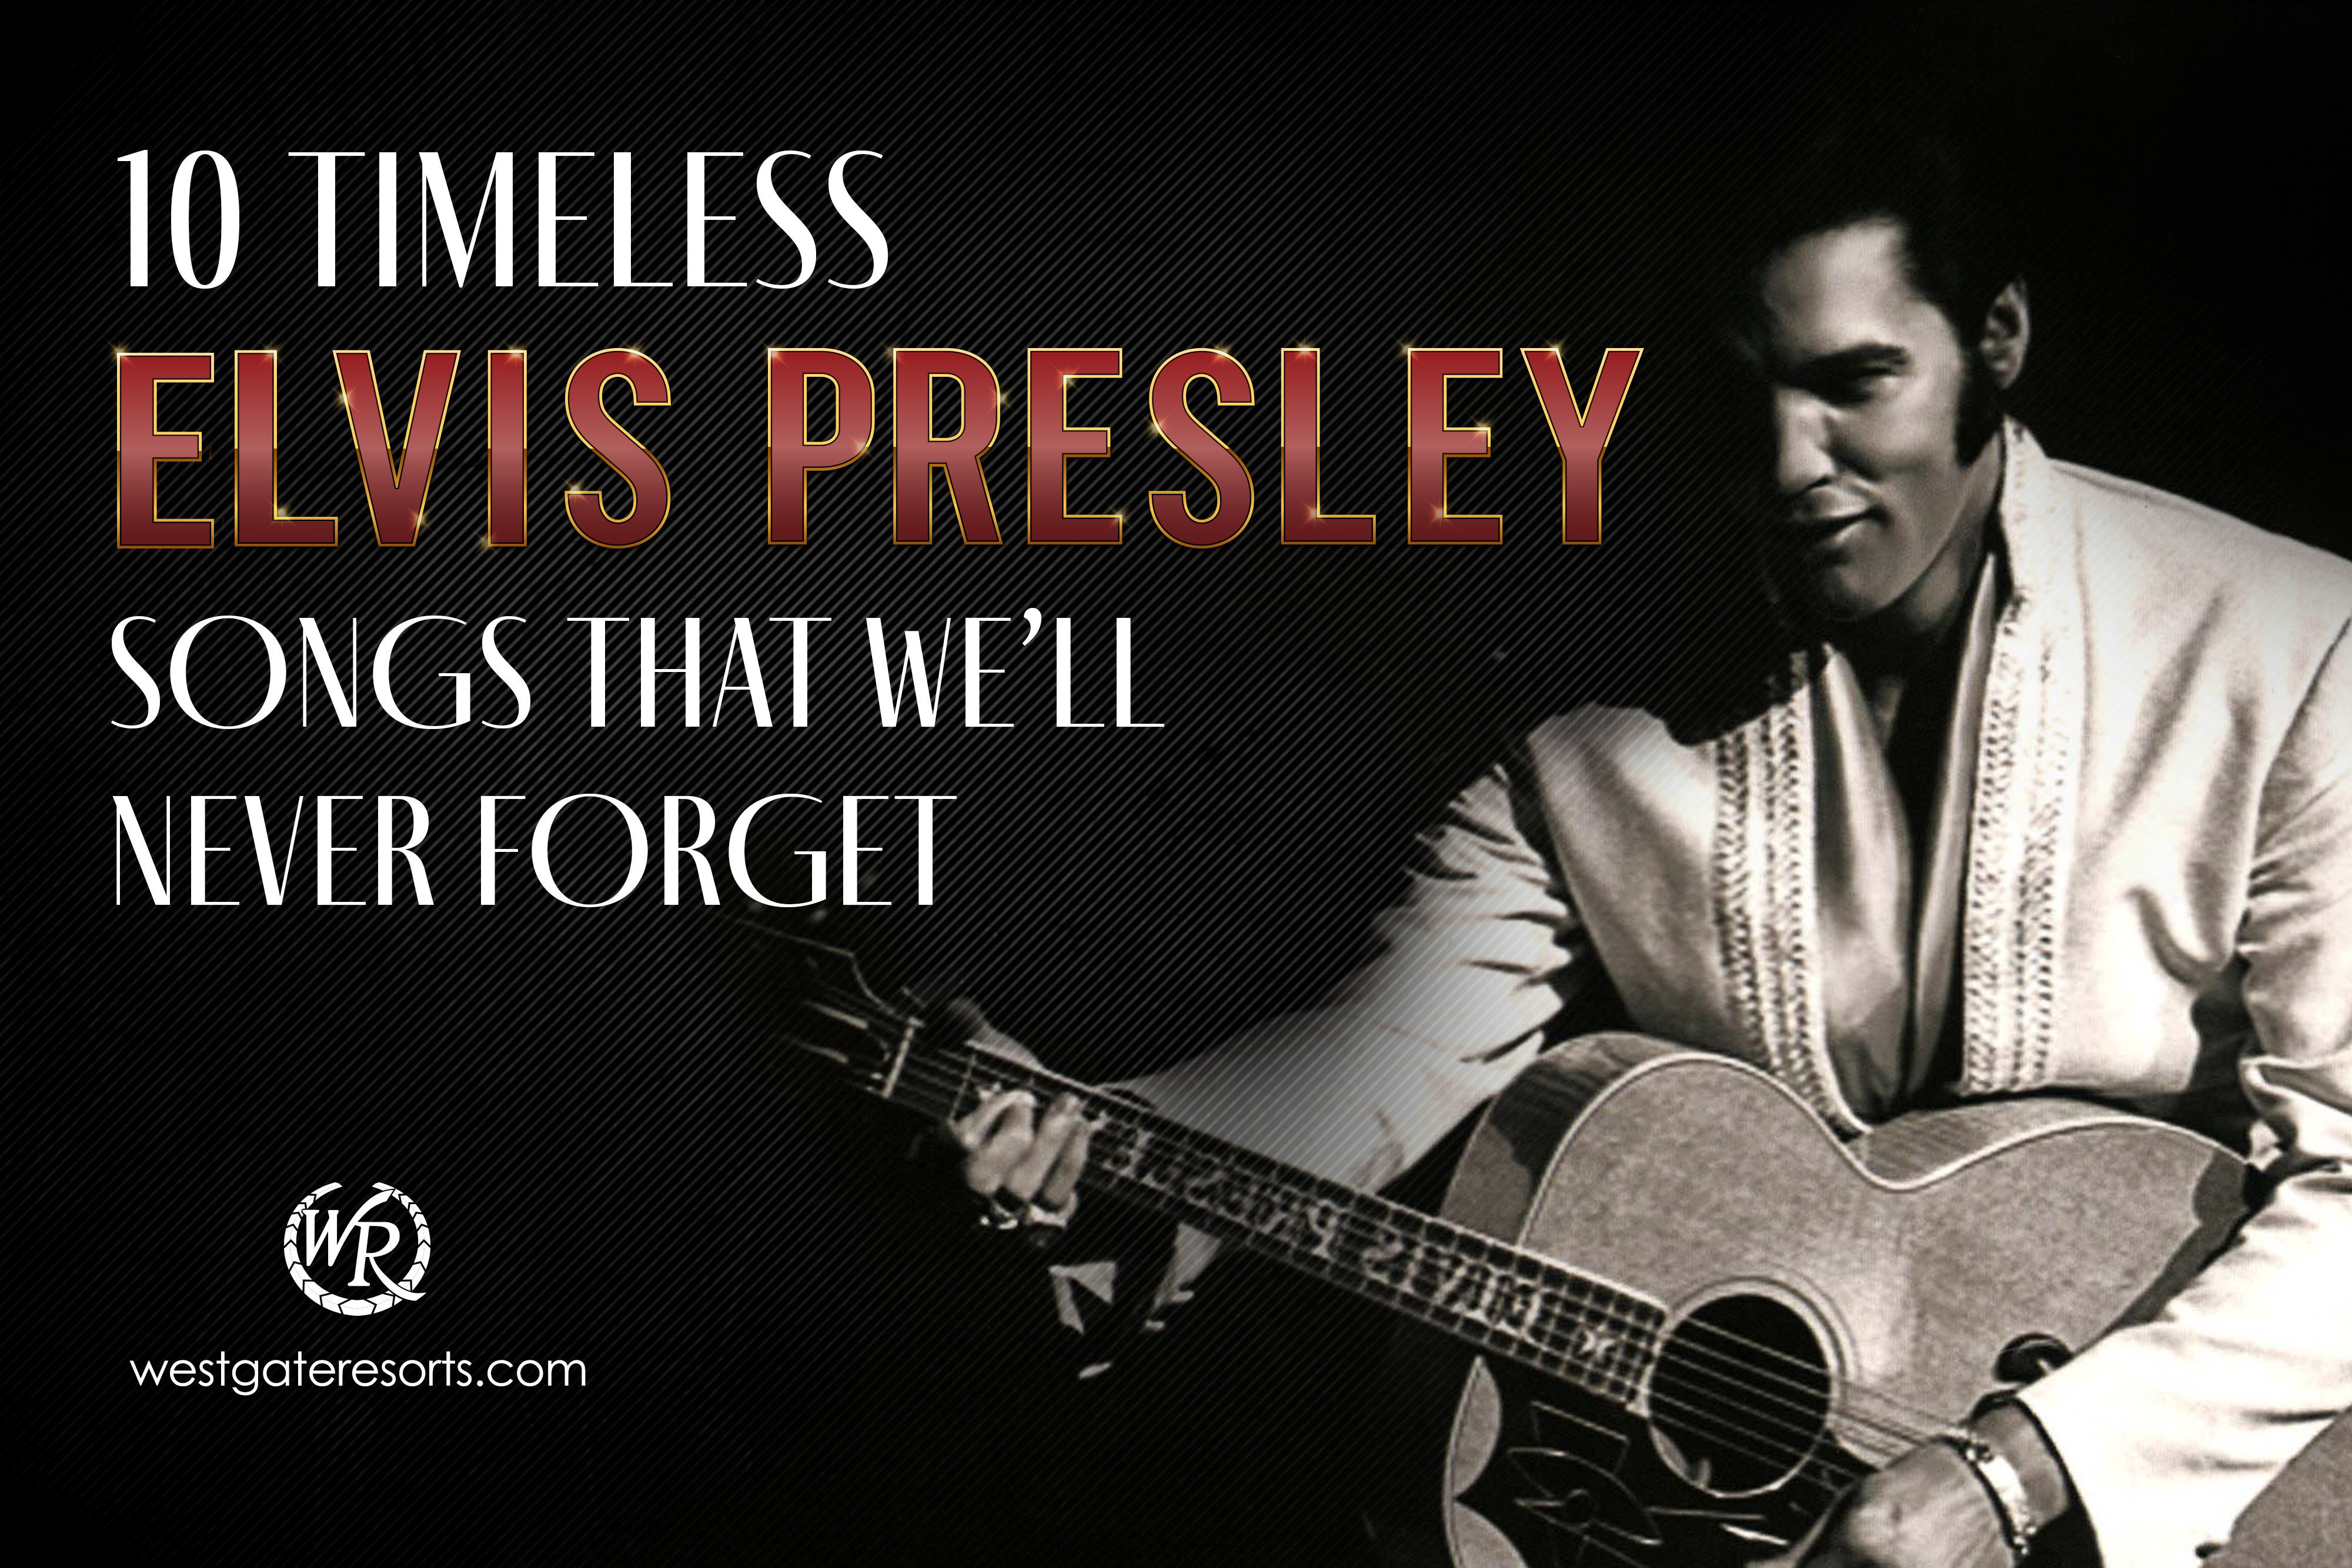 10 Timeless Elvis Presley Songs That We'll Never Forget